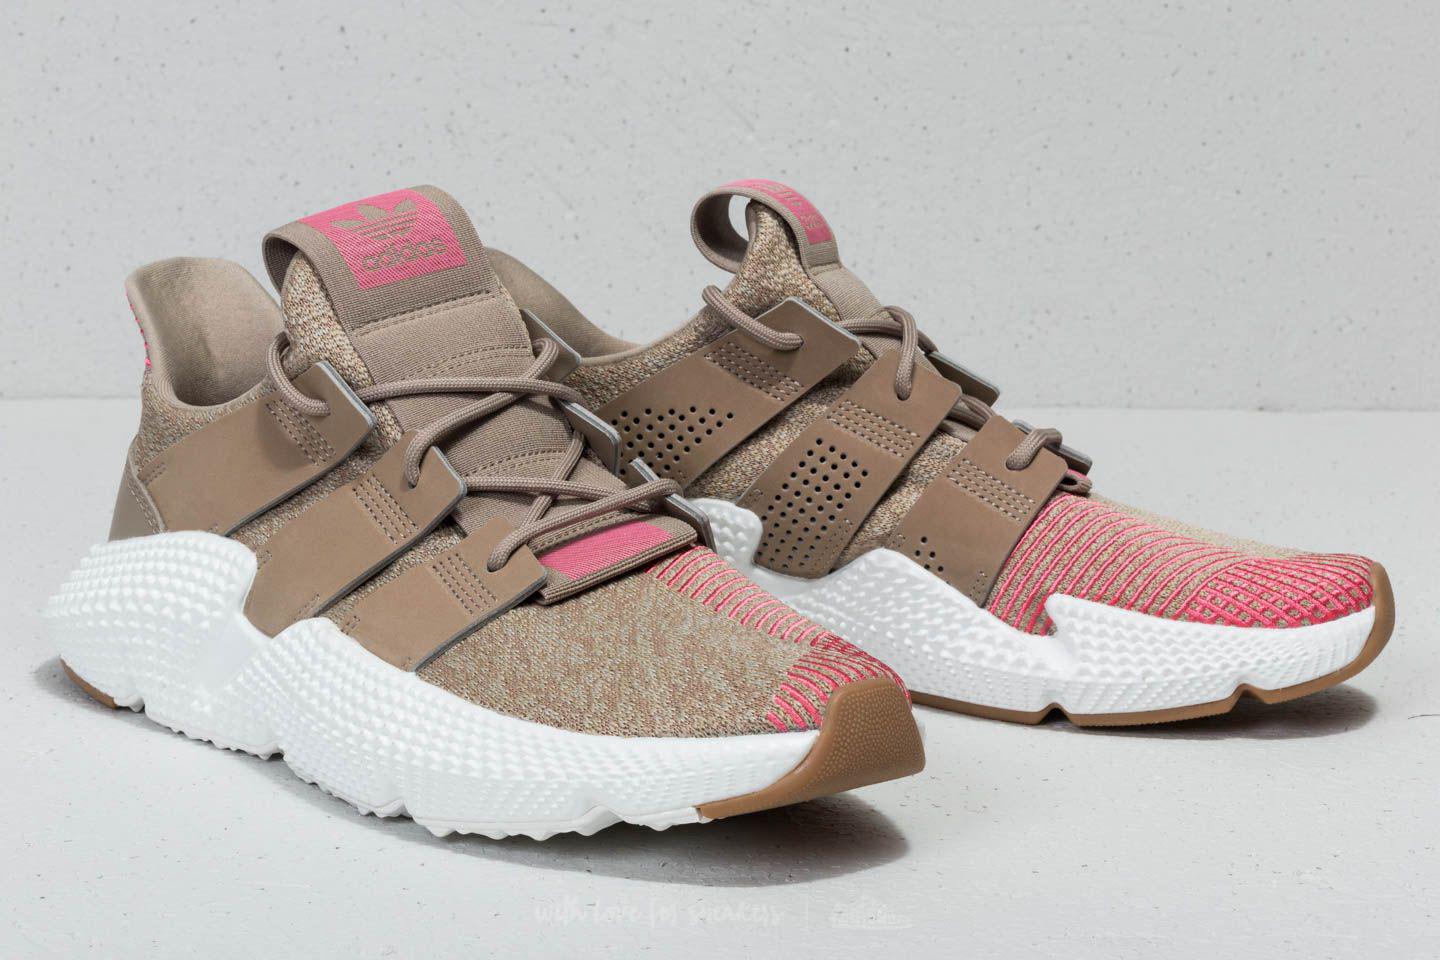 Adidas Prophere Trace Pink United Kingdom, SAVE 53% - aveclumiere.com